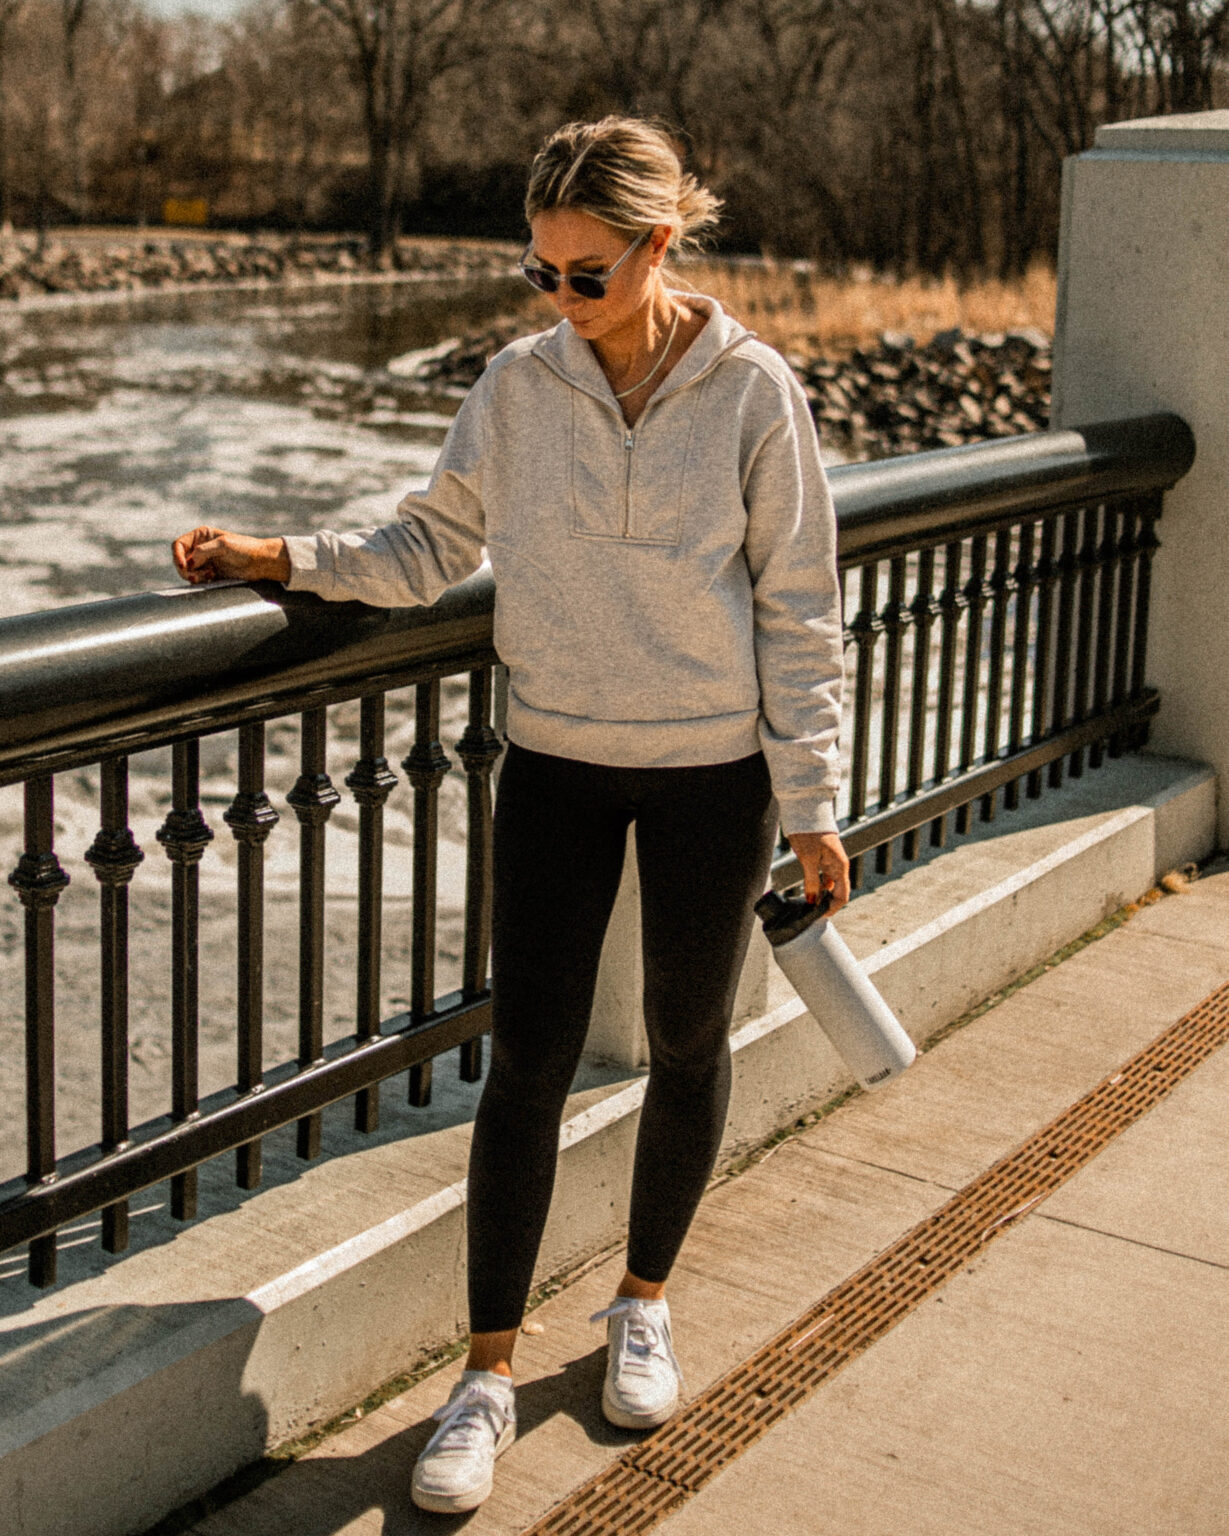 Which Leggings are the Best? Girlfriend, Everlane, or Lululemon?